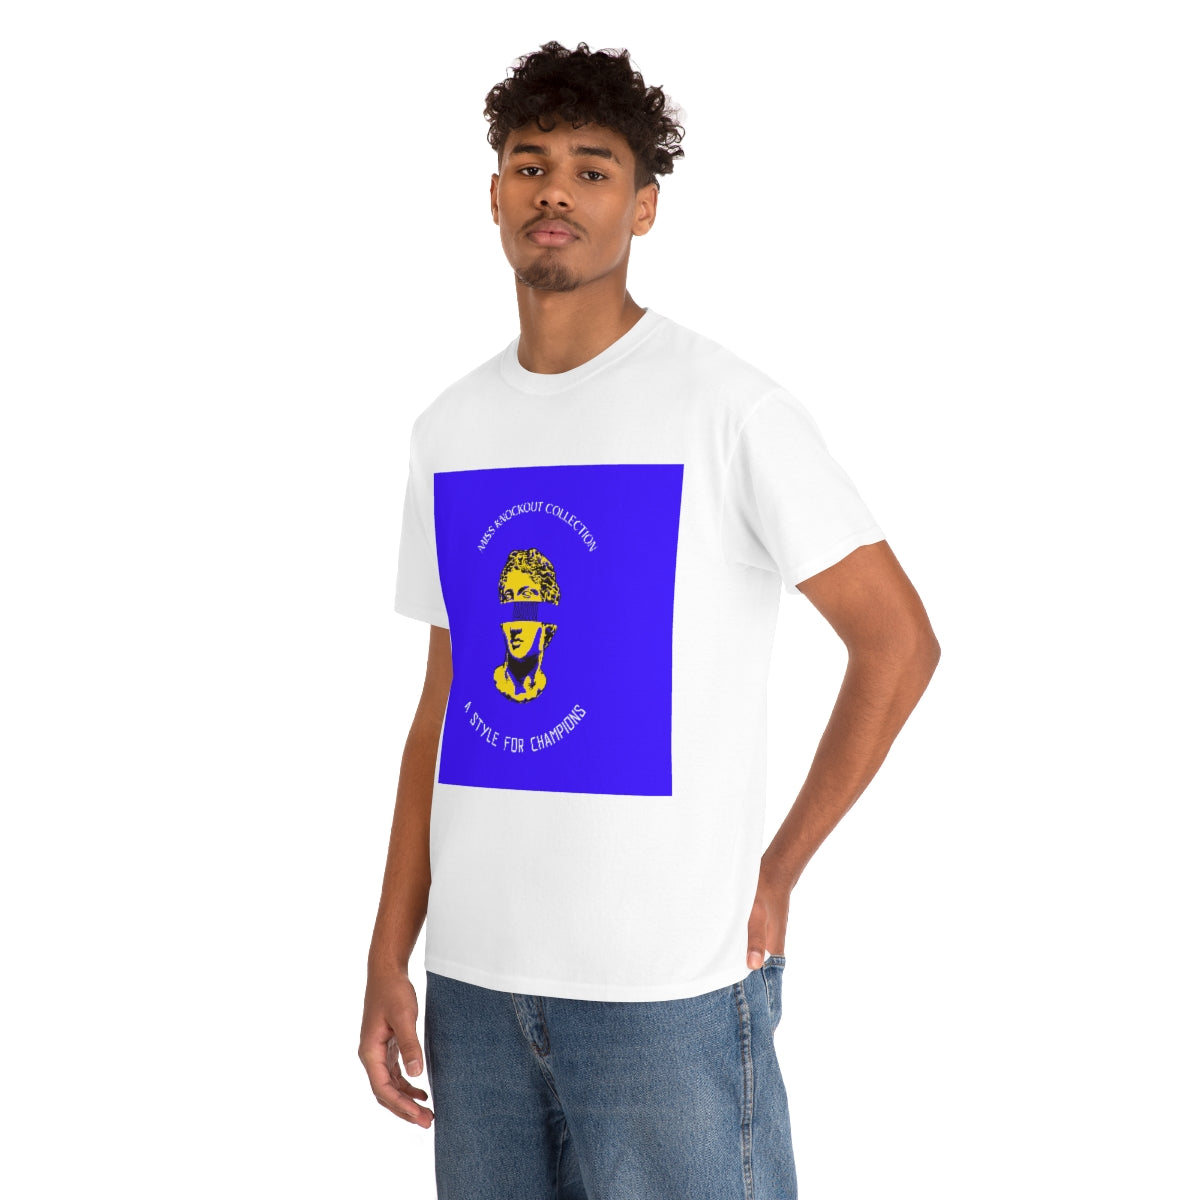 Miss Knockout Collection Unisex Heavy Cotton Tee